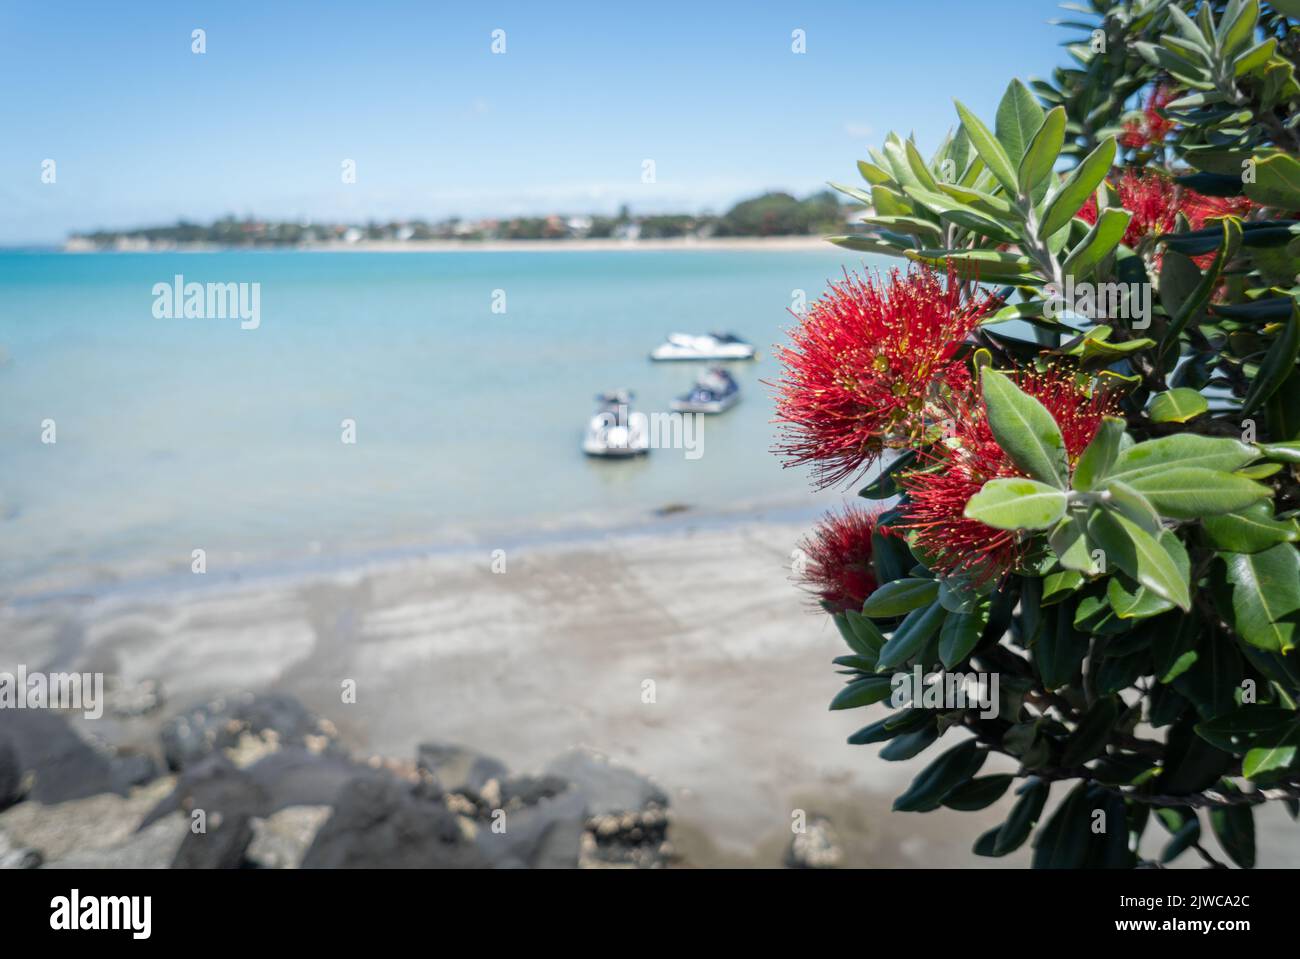 Pohutukawa trees in full bloom with blurred boats in the background, Takapuna beach, Auckland. Stock Photo